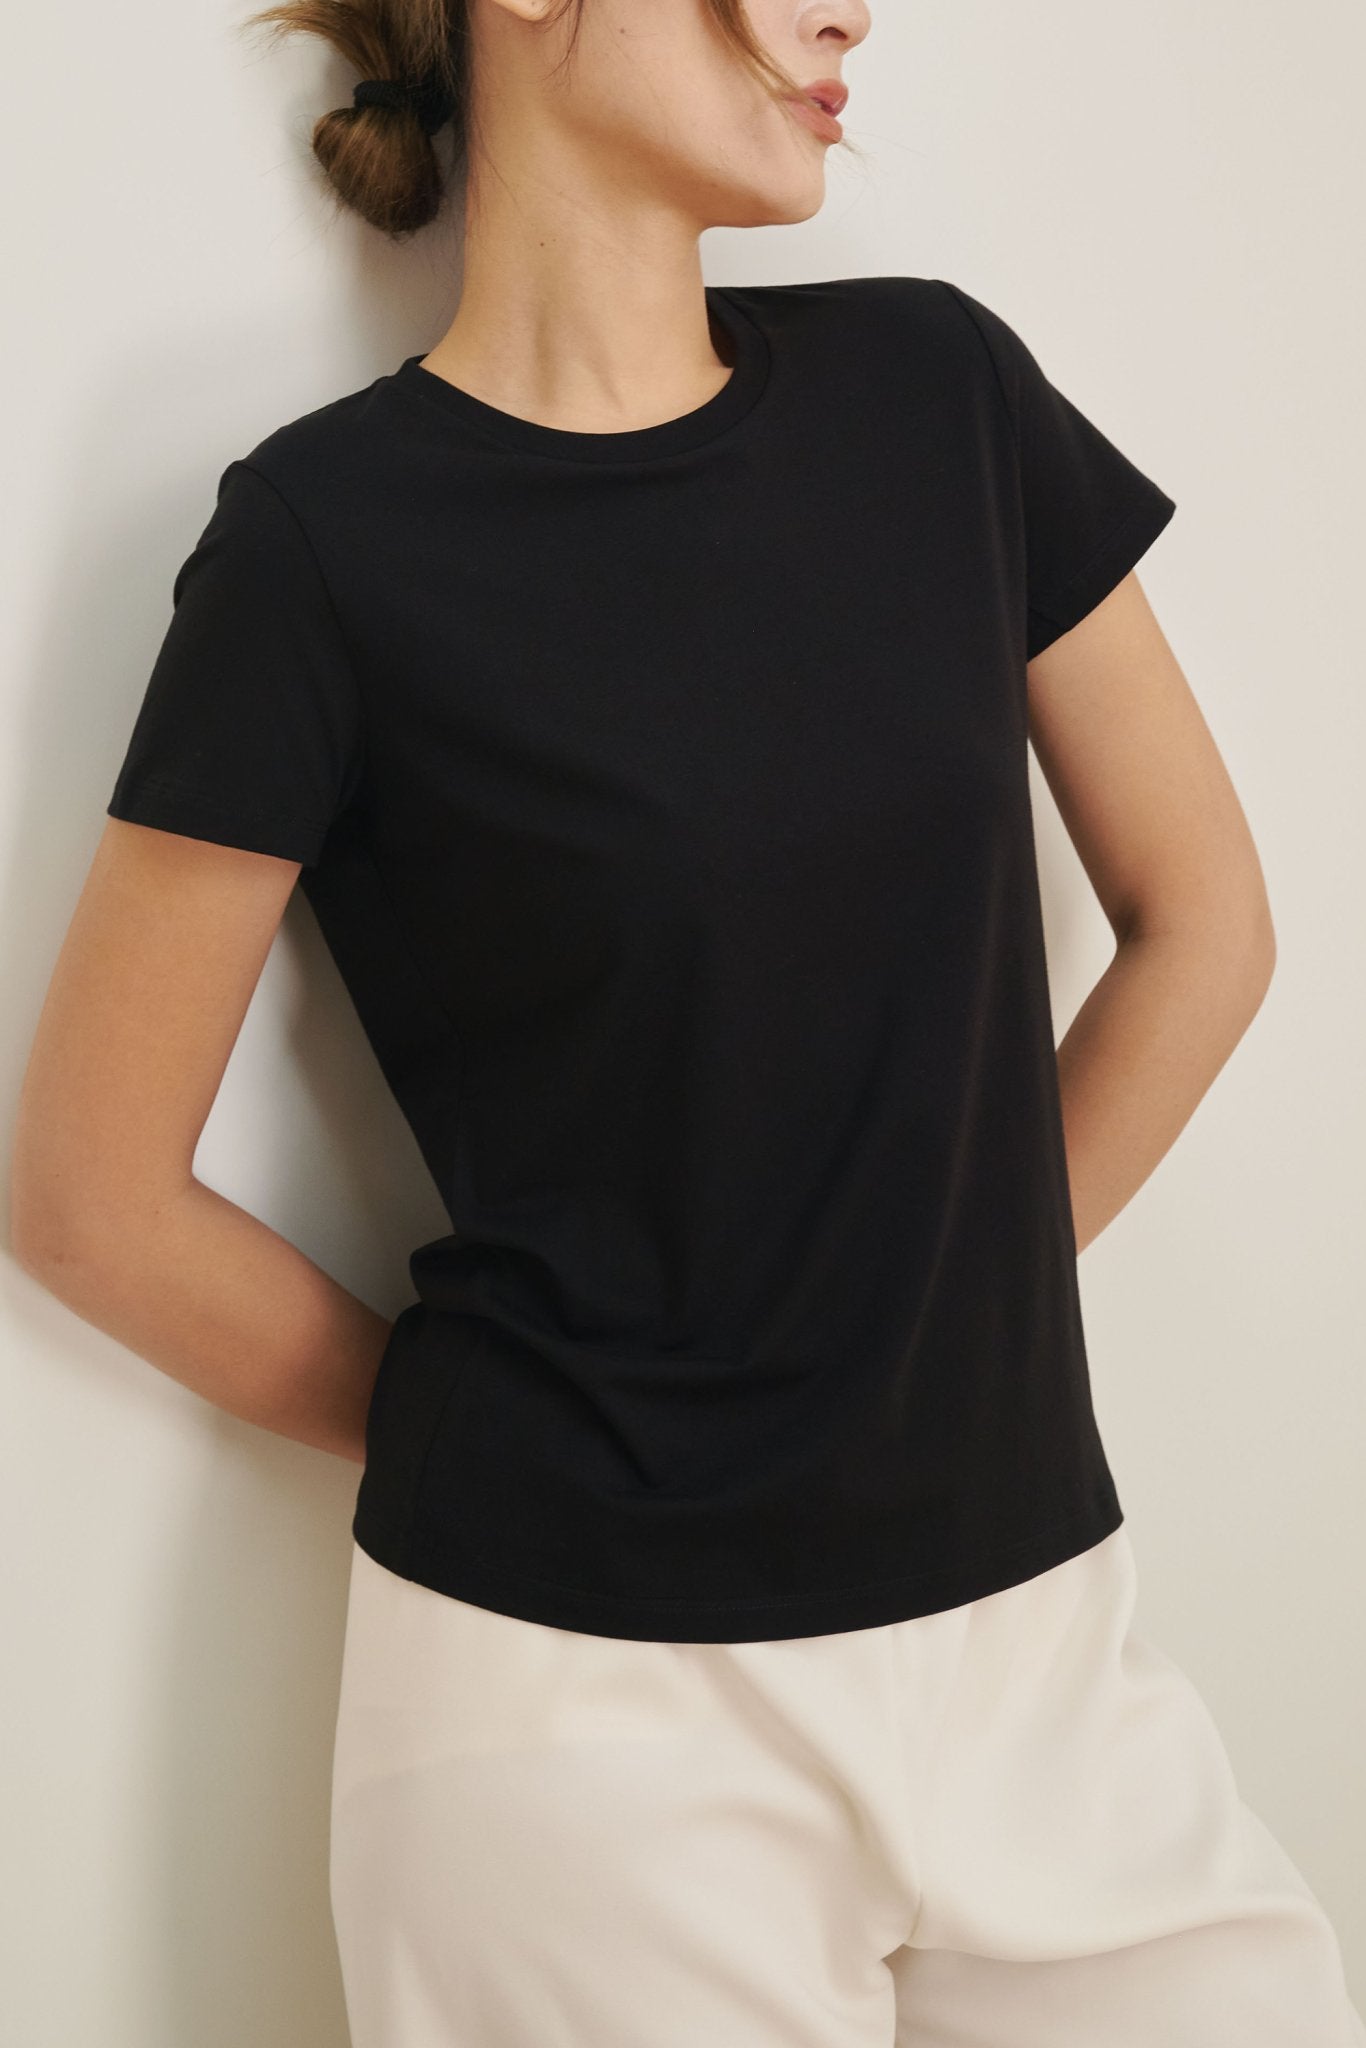 SIGNATURE relaxed jersey tee (Black) - STELLAM